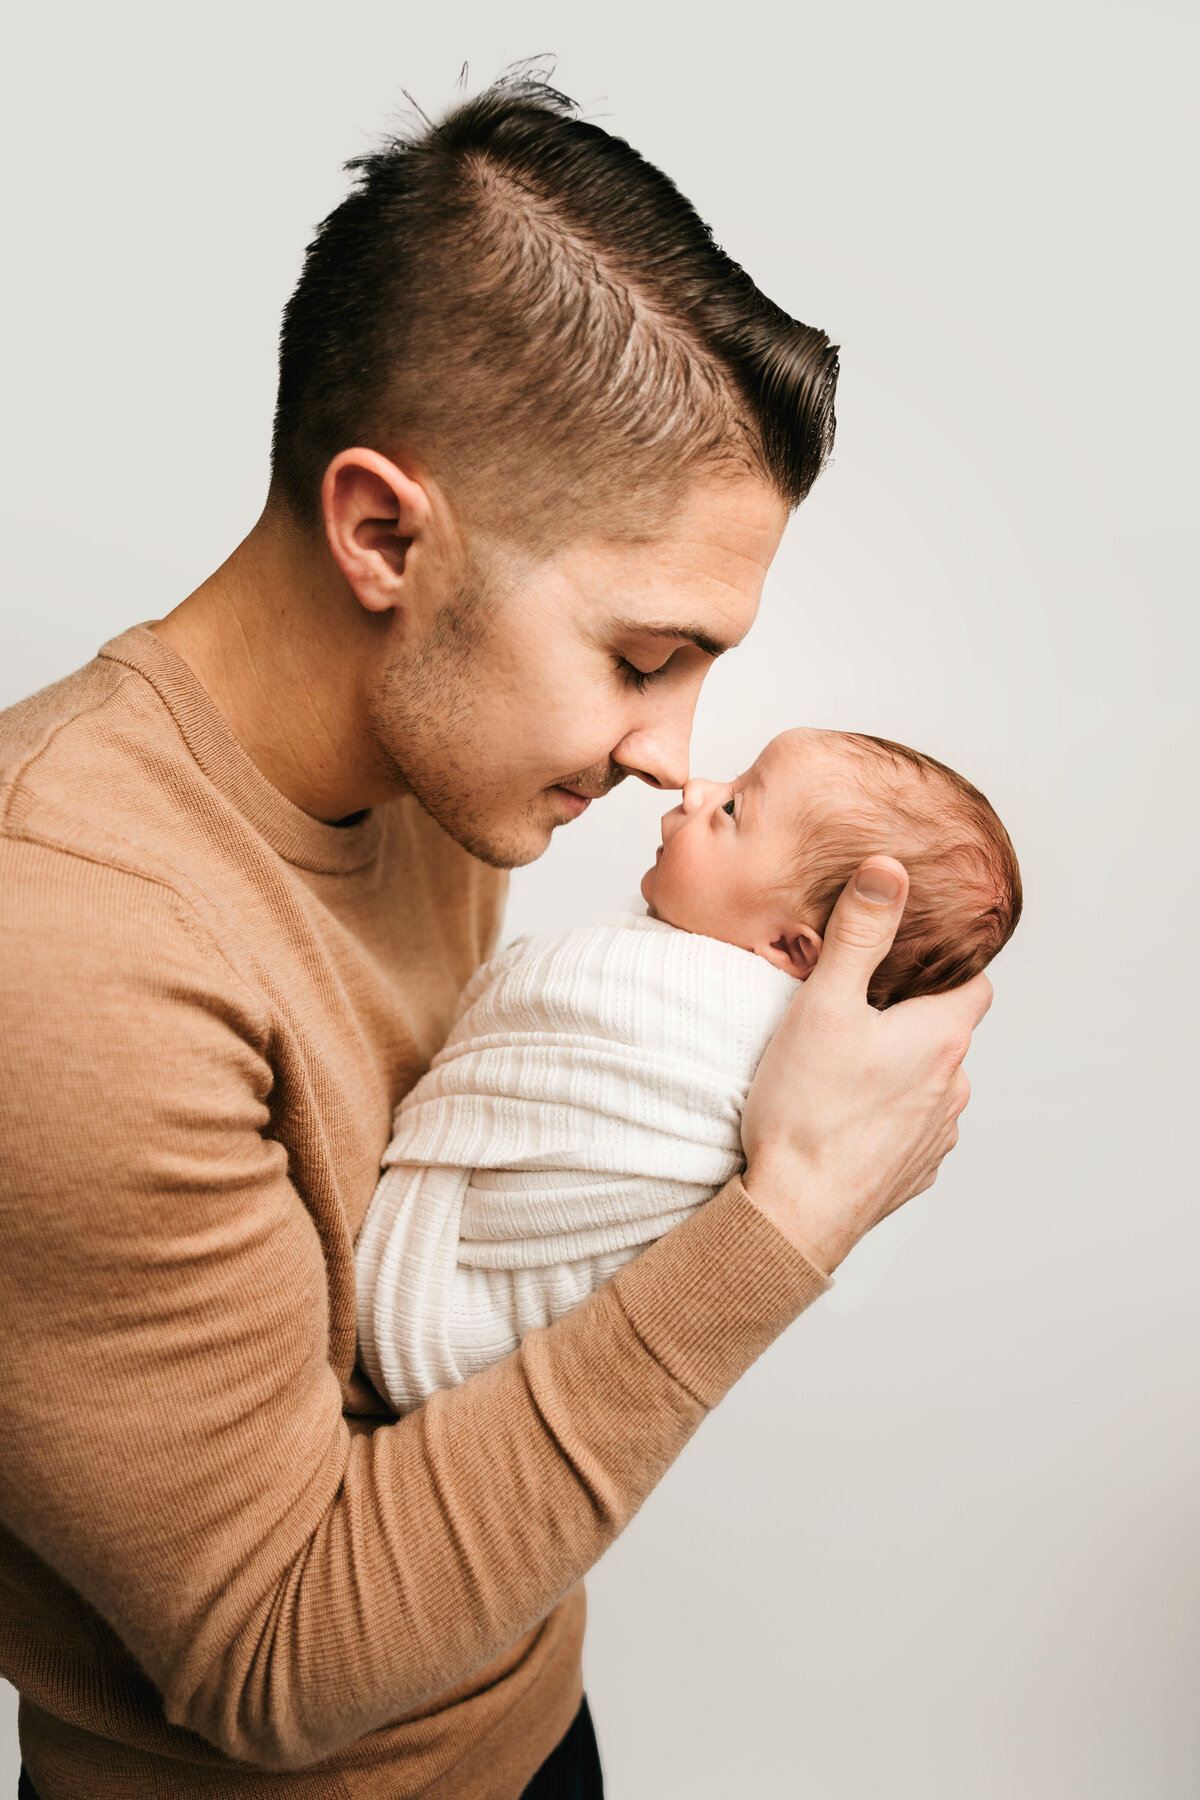 A dad holds his newborn son and softly touches noses.